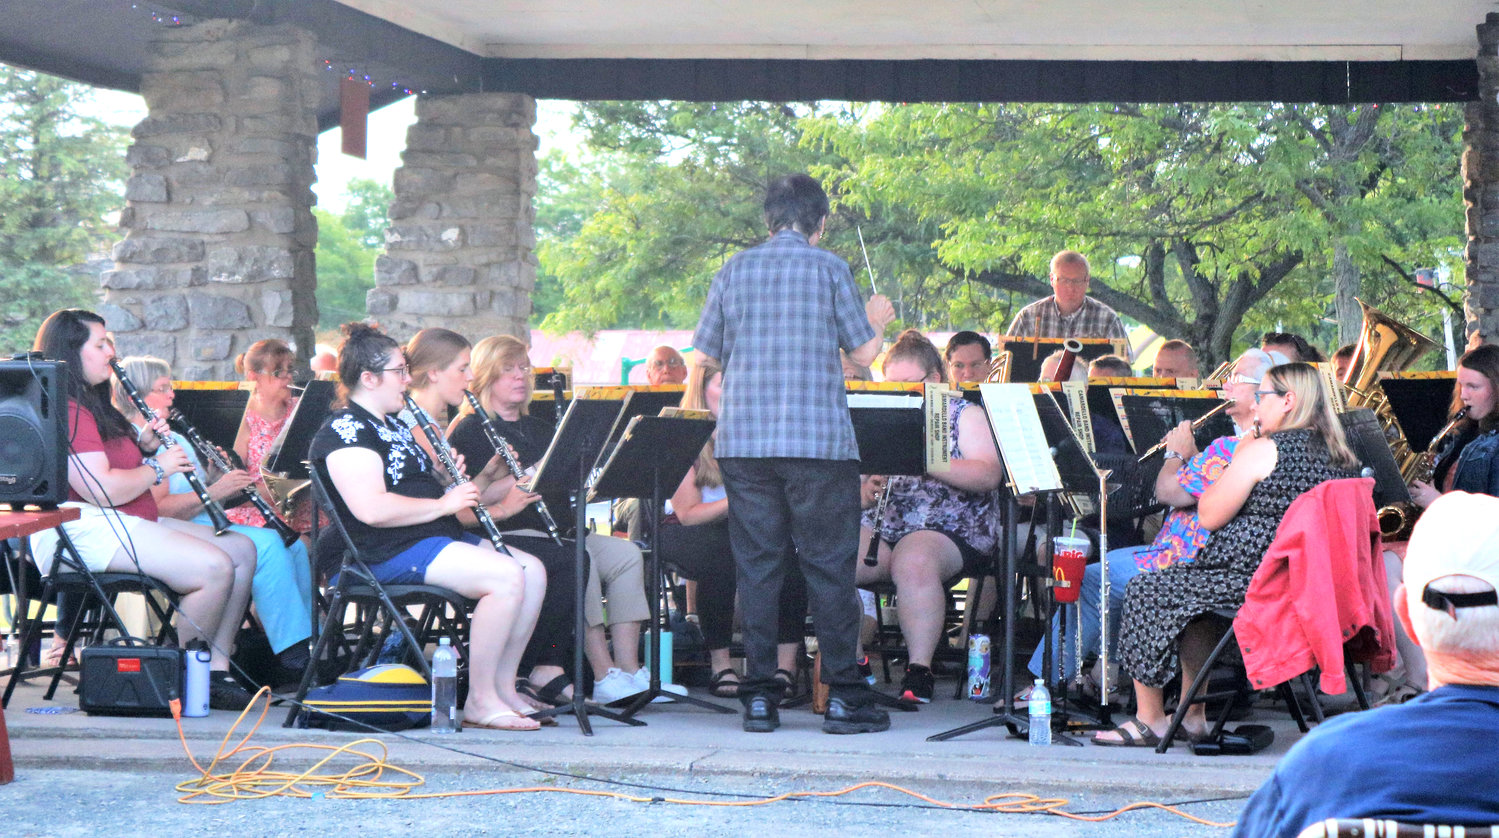 Members of the Boonville Concert Band perform a free show on Friday, July 15. The event kicked off this year’s summer concert series for the group. The next show in the series is Friday, July 22, at Erwin Park.